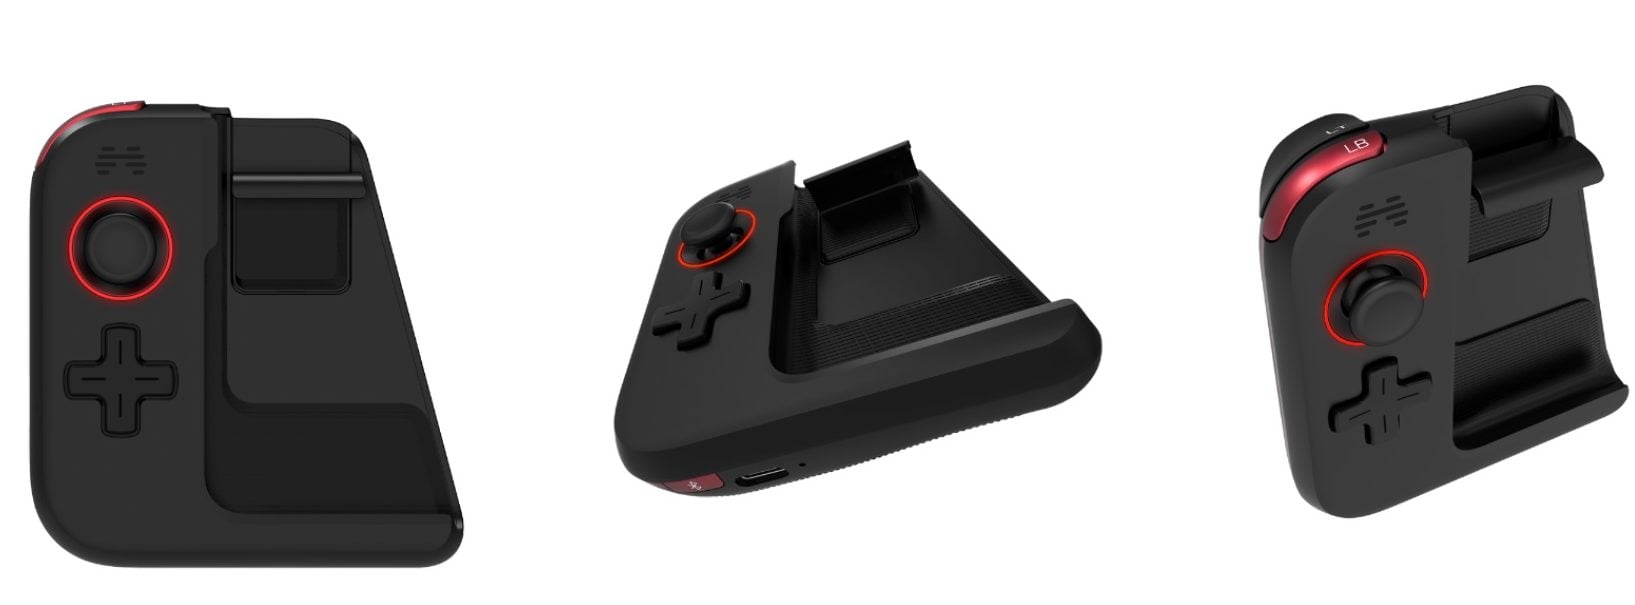 Bedankt blad Justitie BETOP G1 Game Controller is a DFH accessory for the Huawei Mate 20 series,  now available on Giztop - Gizmochina